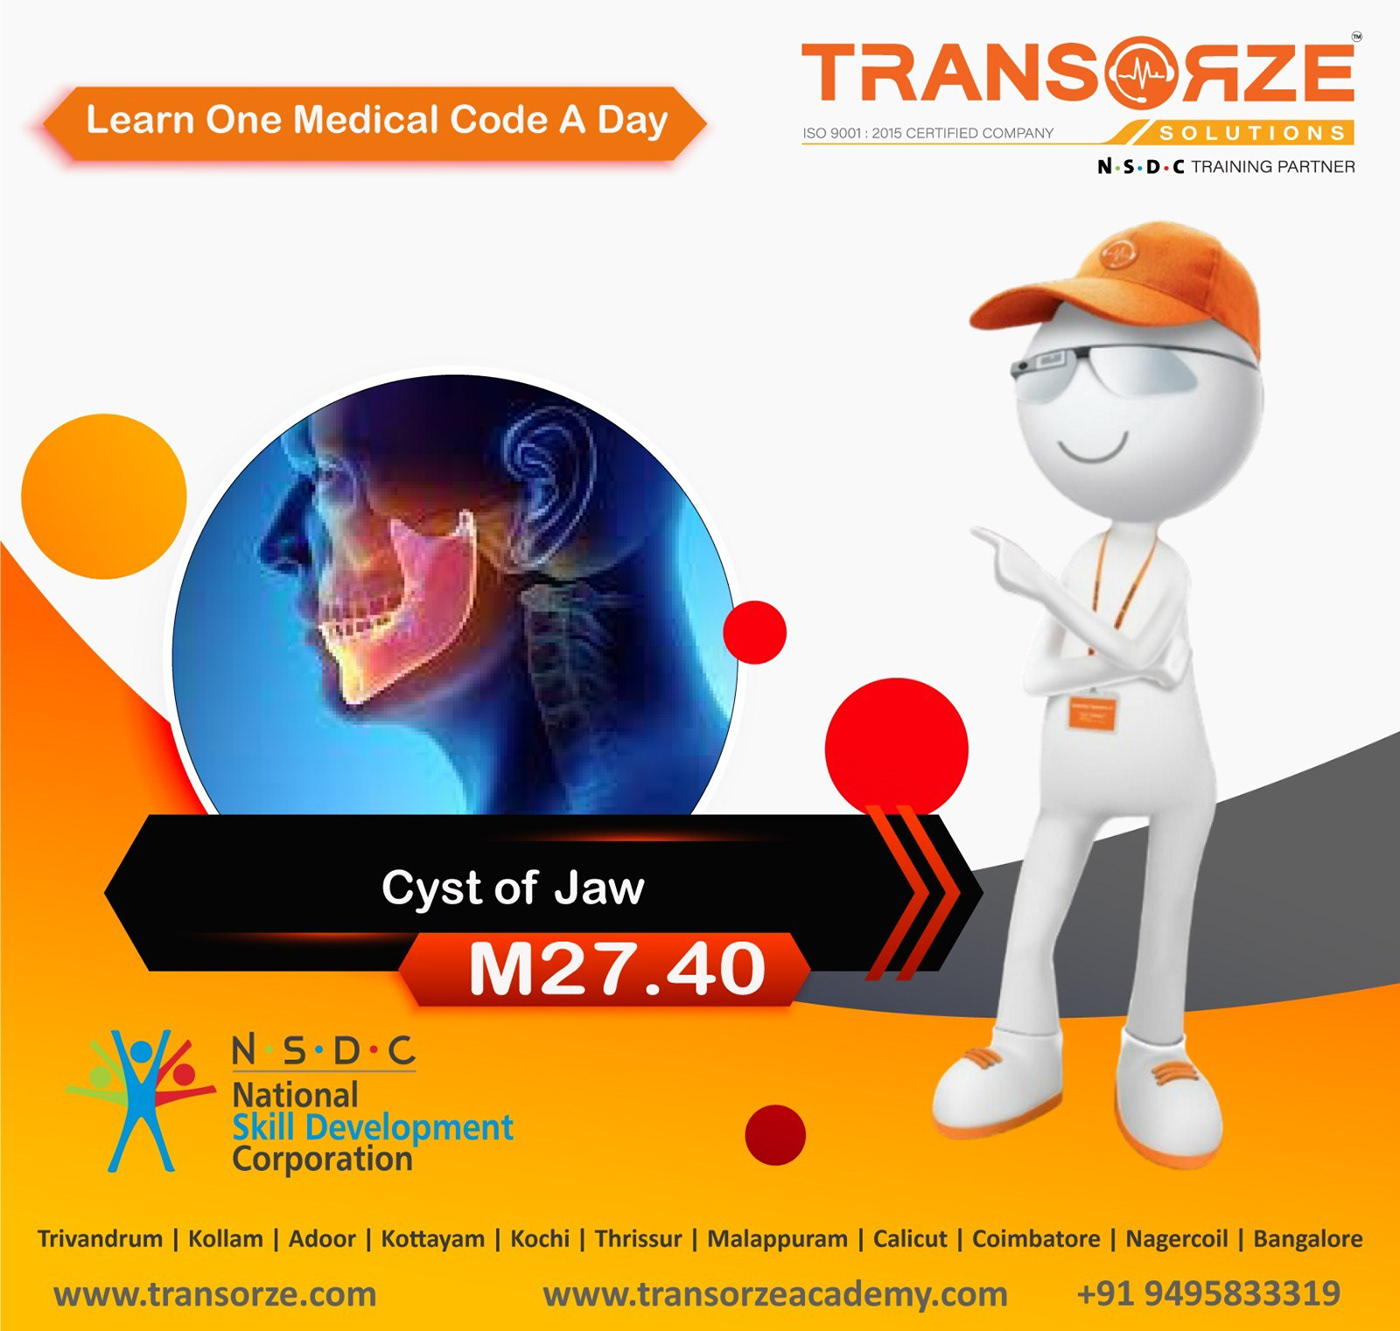 ICD ICD10 icdl medical coding medical scribing medical transcription doctors icd-10 medical workers transorze solutions